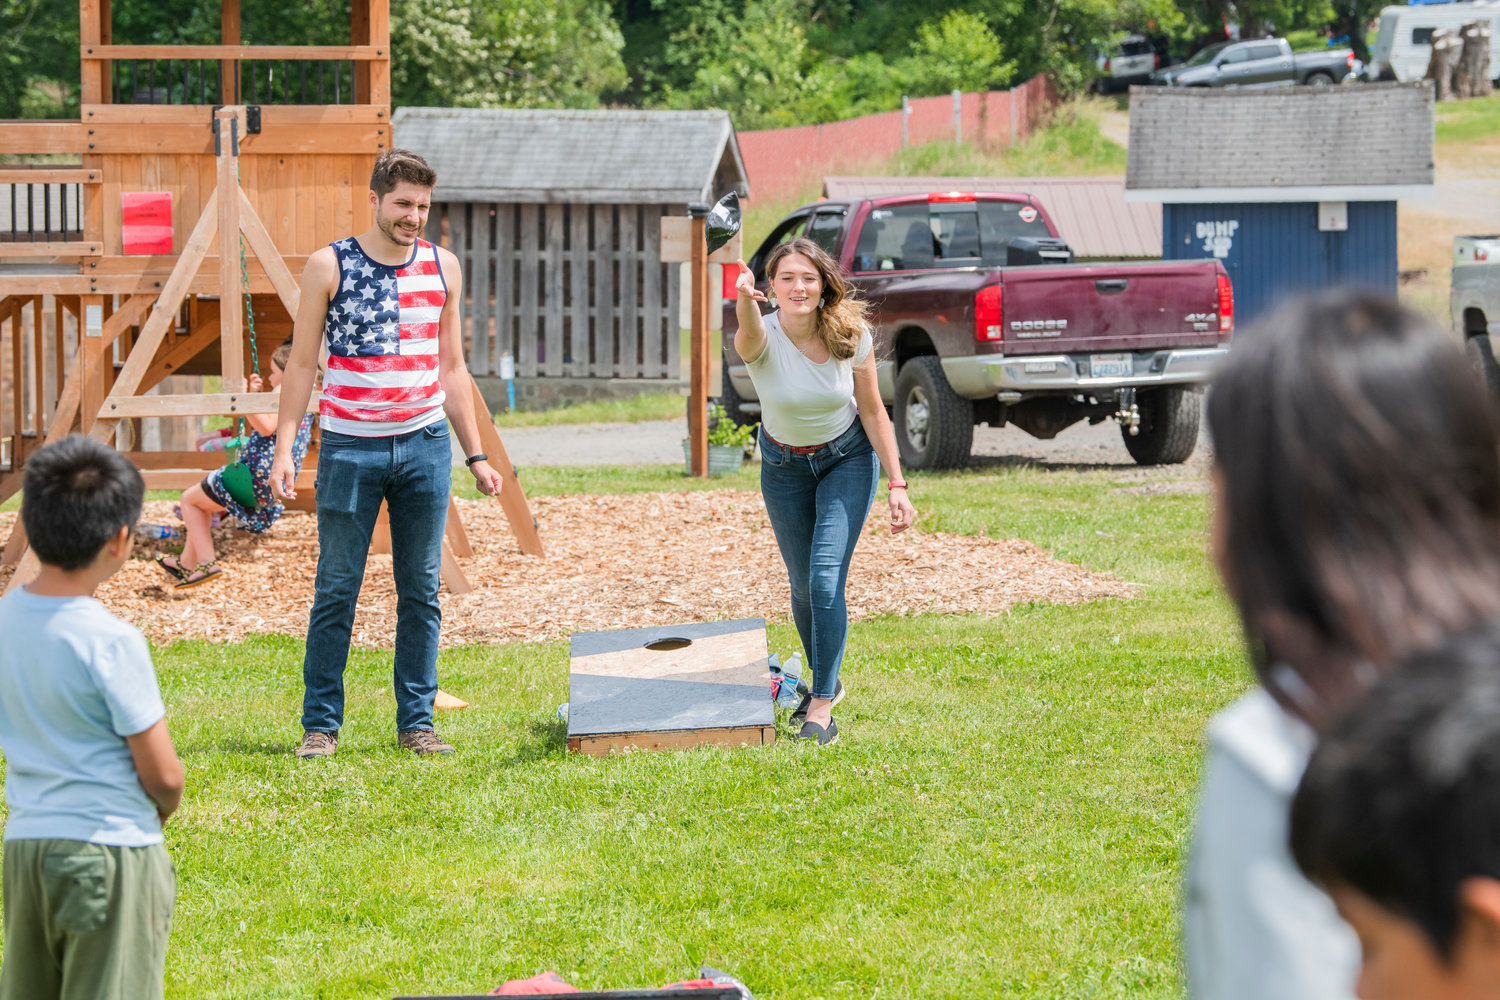 Shane and Lauren Welter smile while playing cornhole at the Lions Den Campground before performing music together as “Shore Lane” Saturday in Mineral.